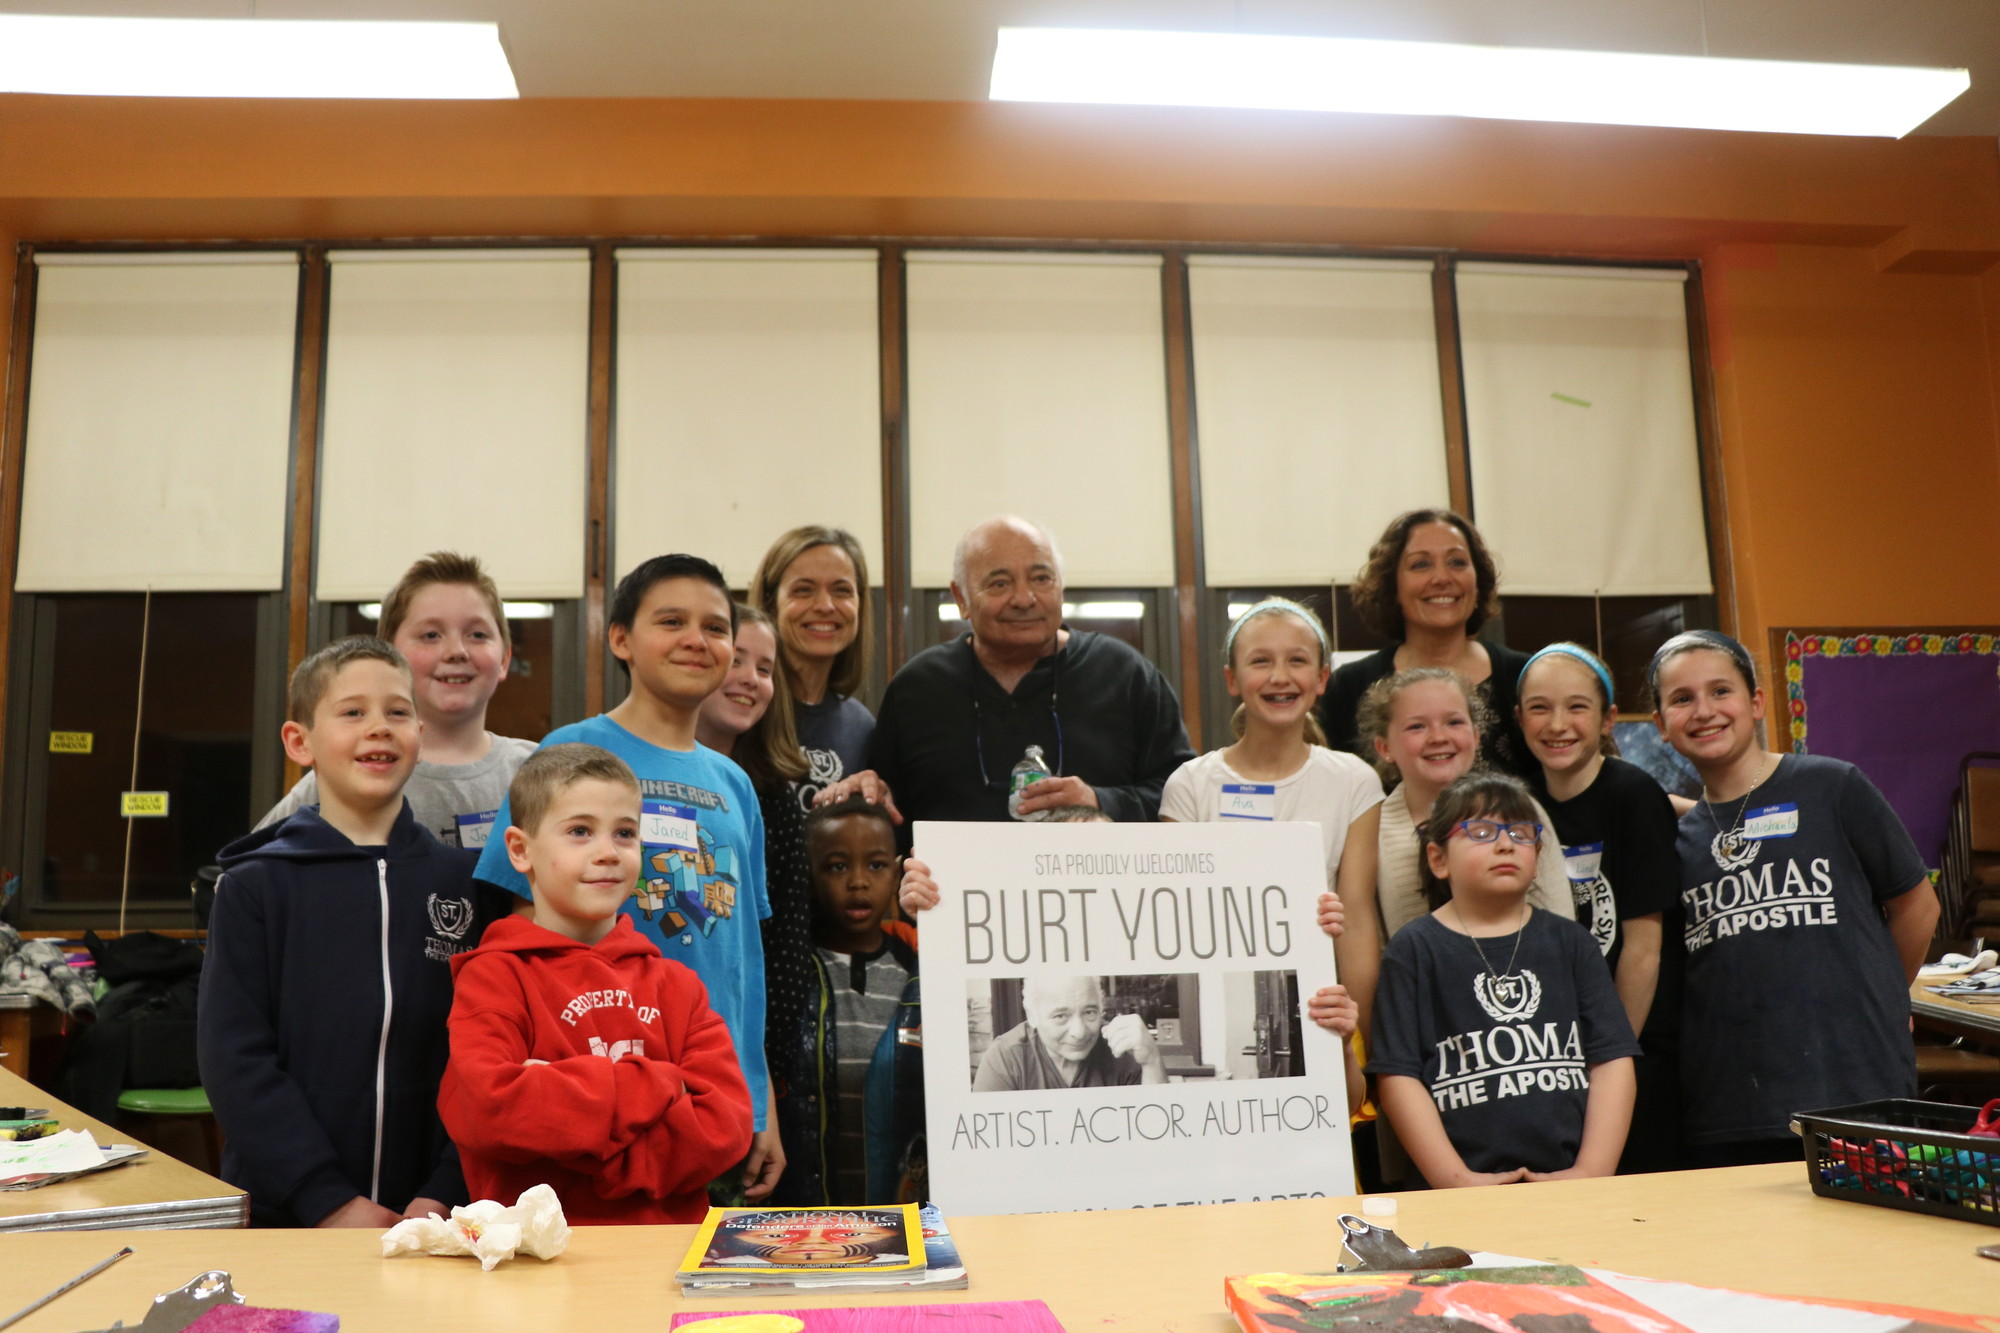 Young, Picone, and St. Thomas Principal Valerie Gigante, right, back row, with the students after their paintings were finished.